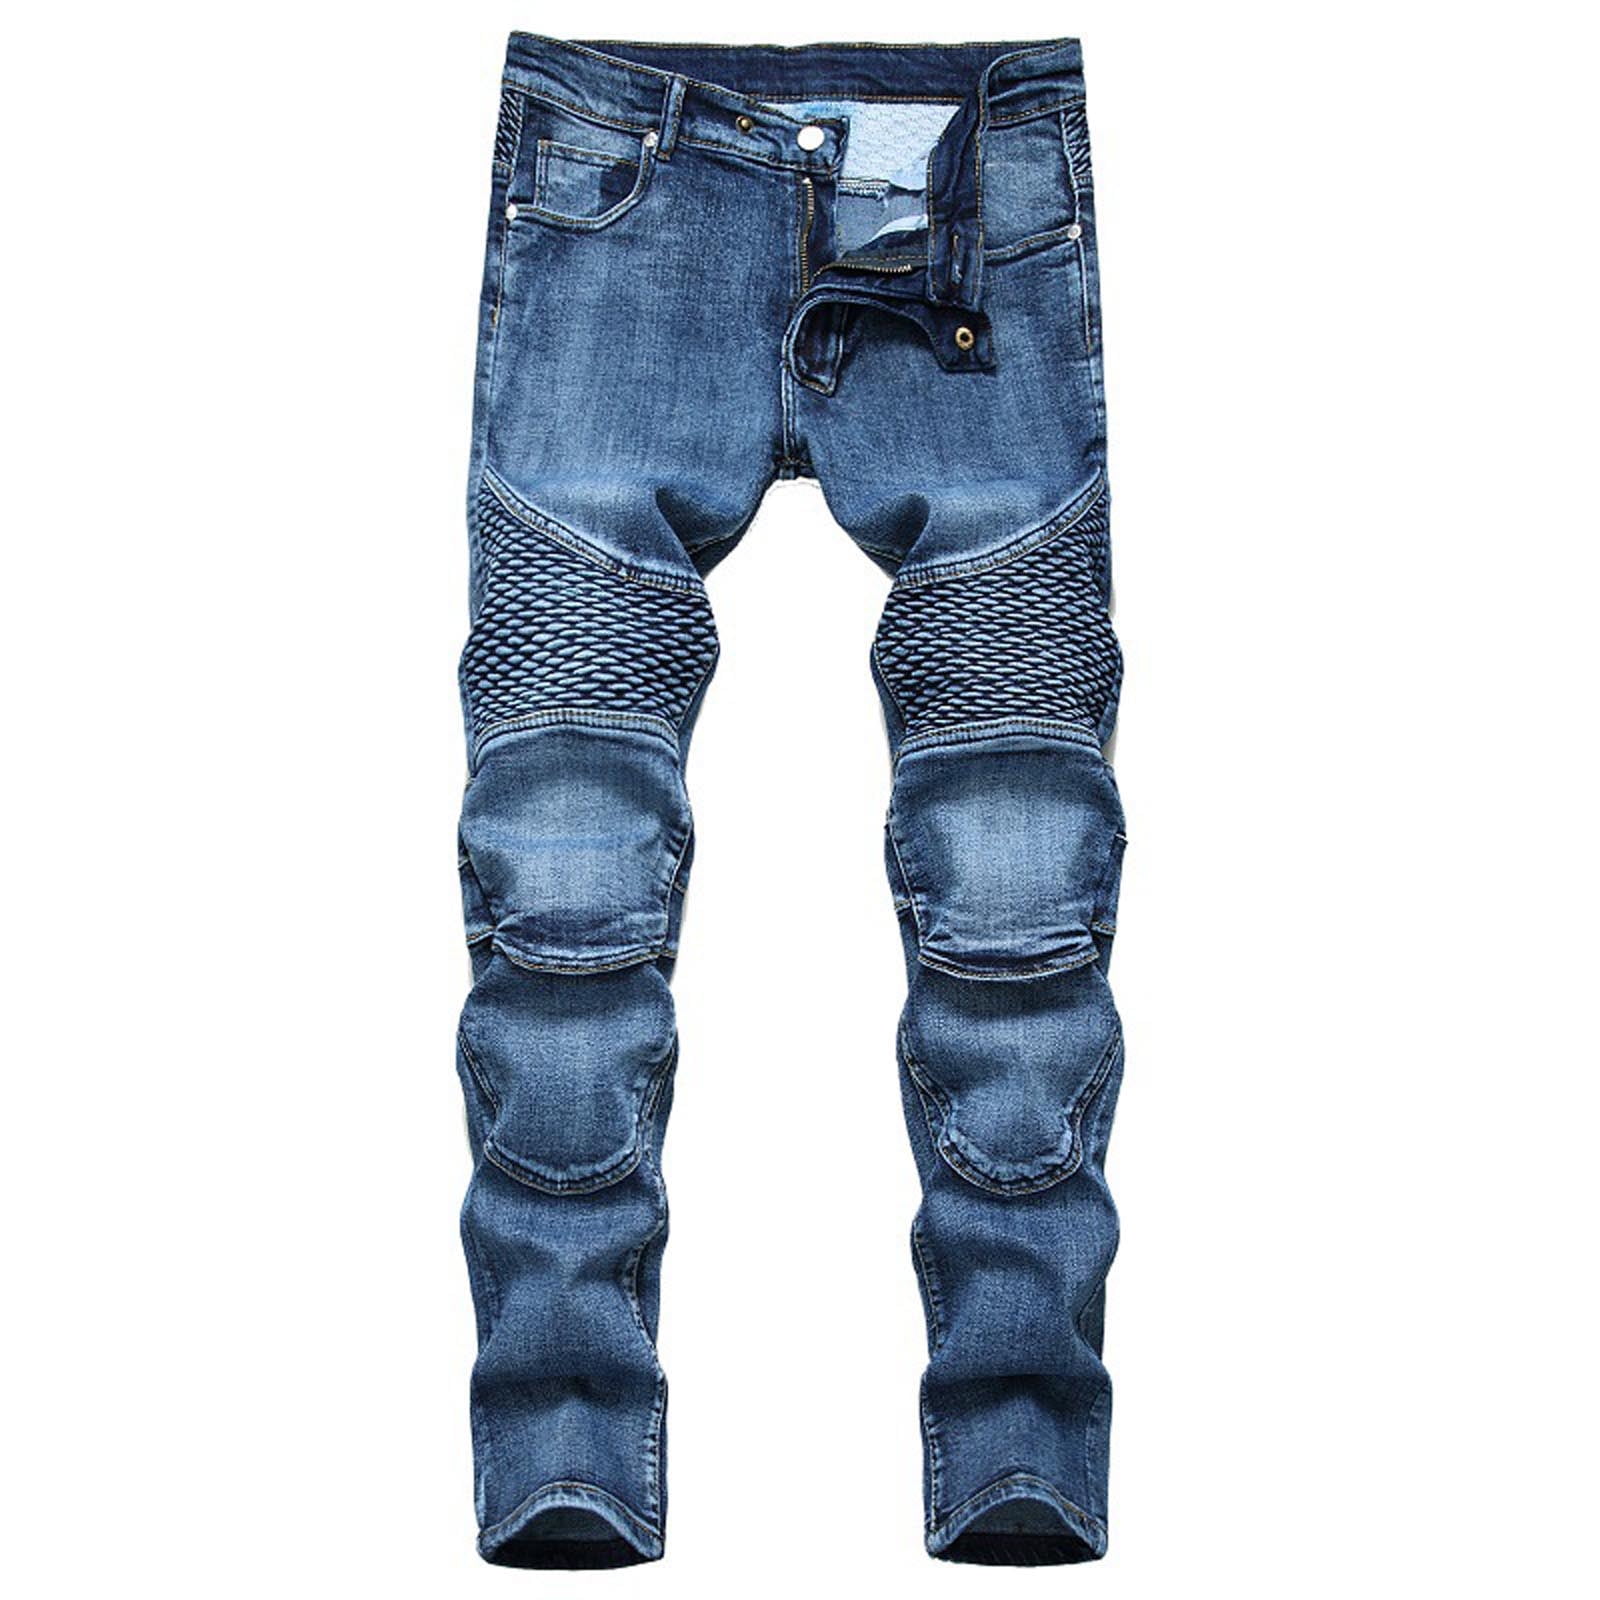 IROINNID Jean Pants For Men Full Length Dark Wash Button Zipper Casual  Skinny Jean Pants With Pockets